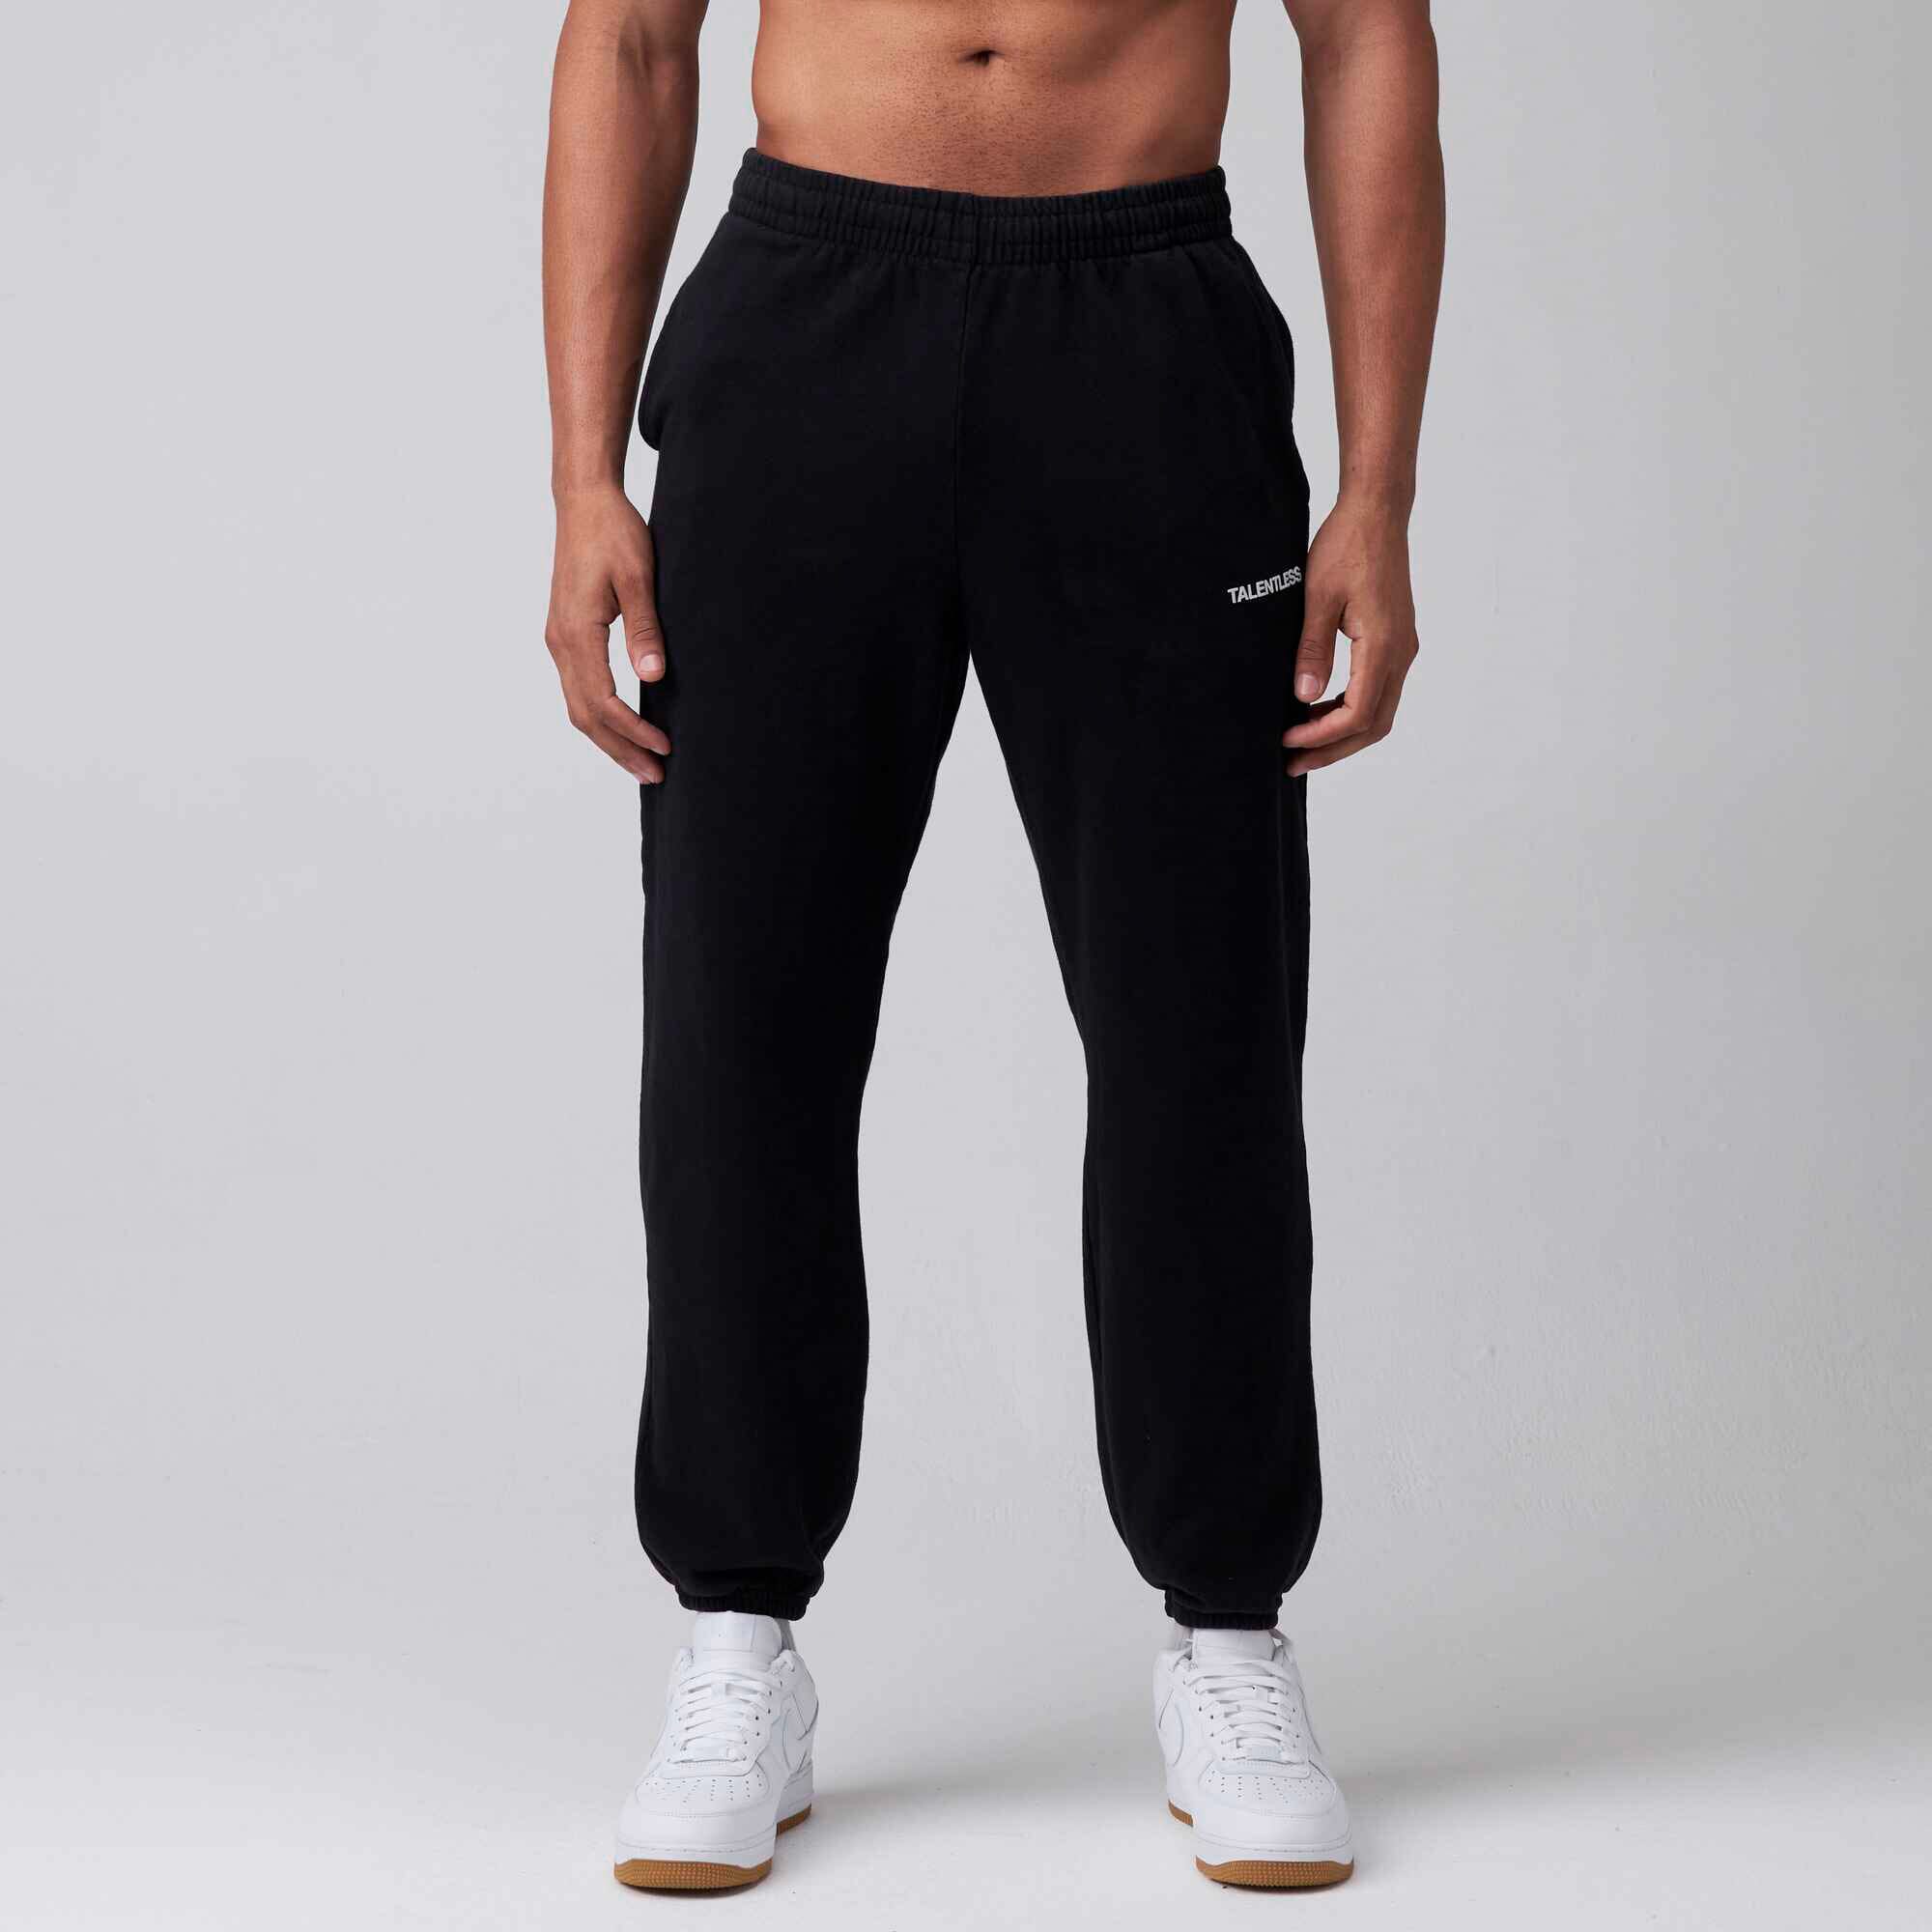 The Best Sweatpants from Revolve - Sartorial Meanderings